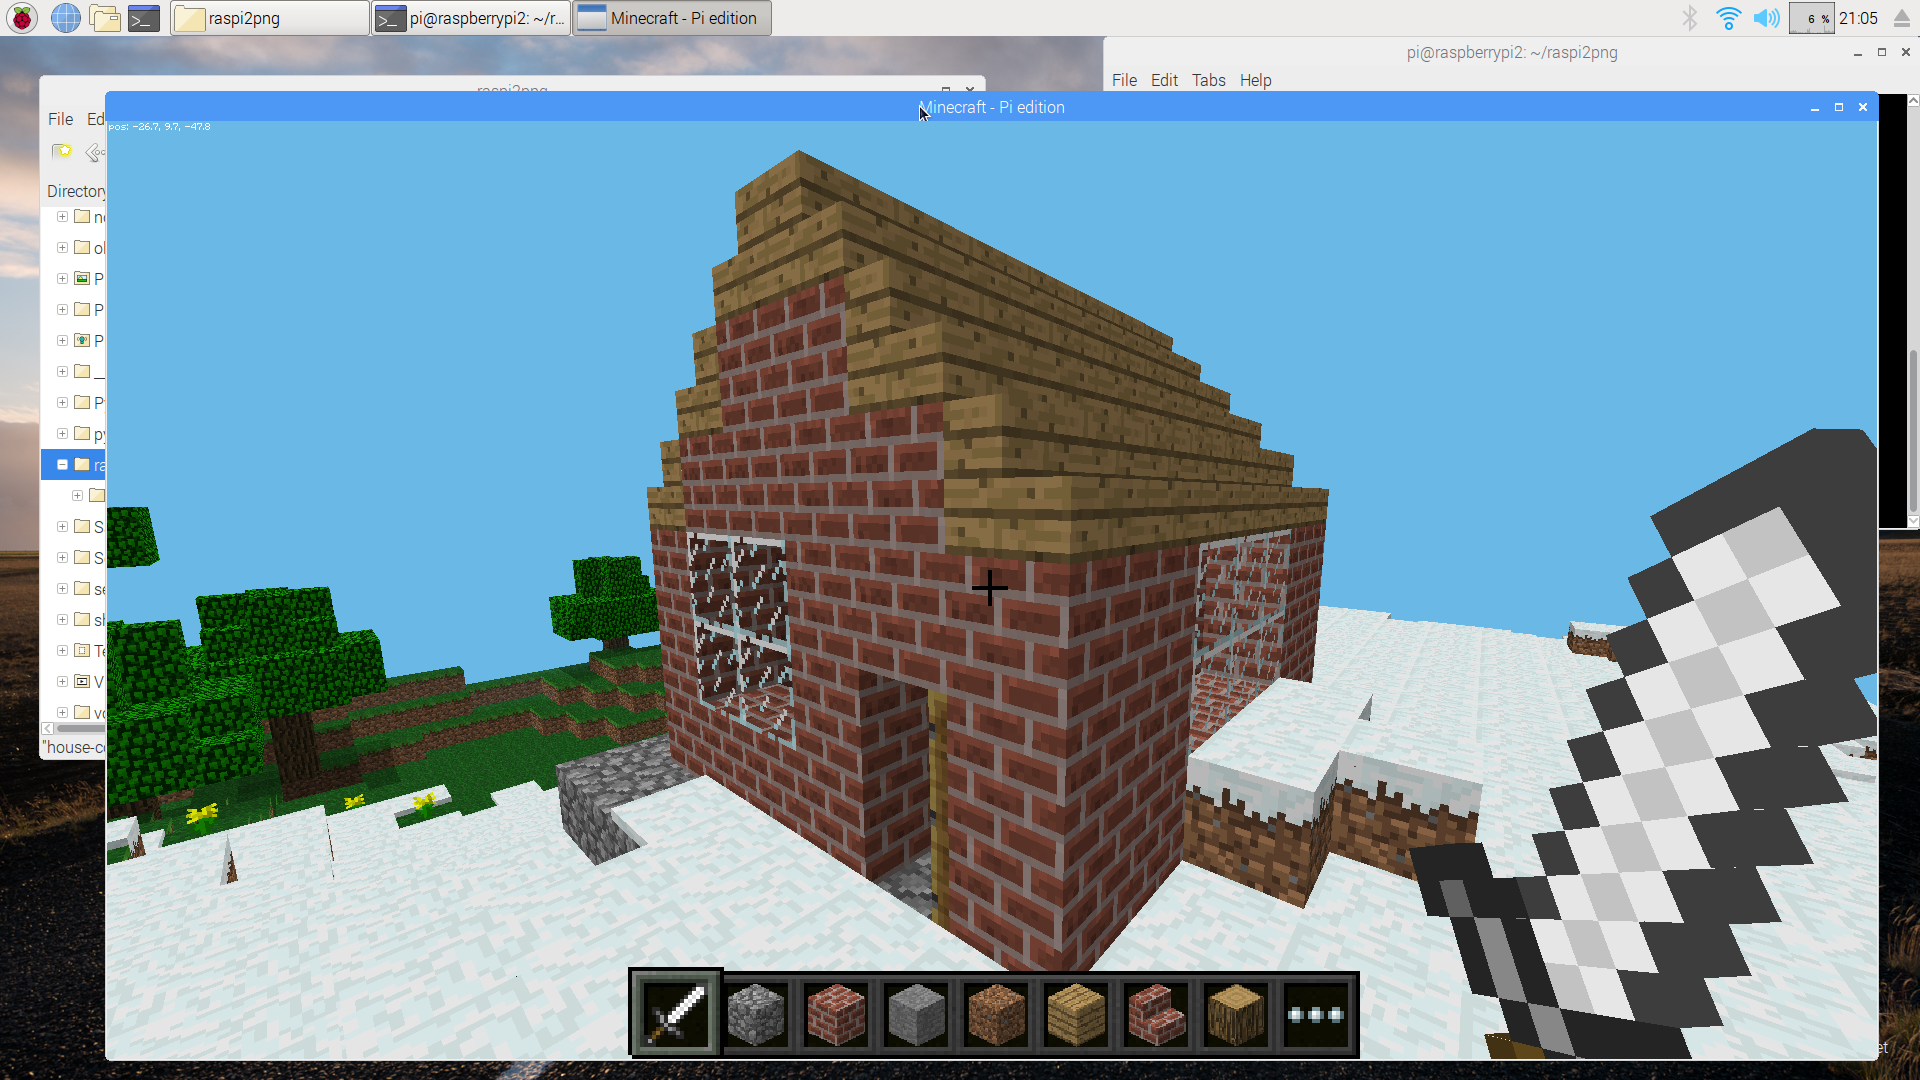 Build a house in Minecraft using Python - Raspberry Pi